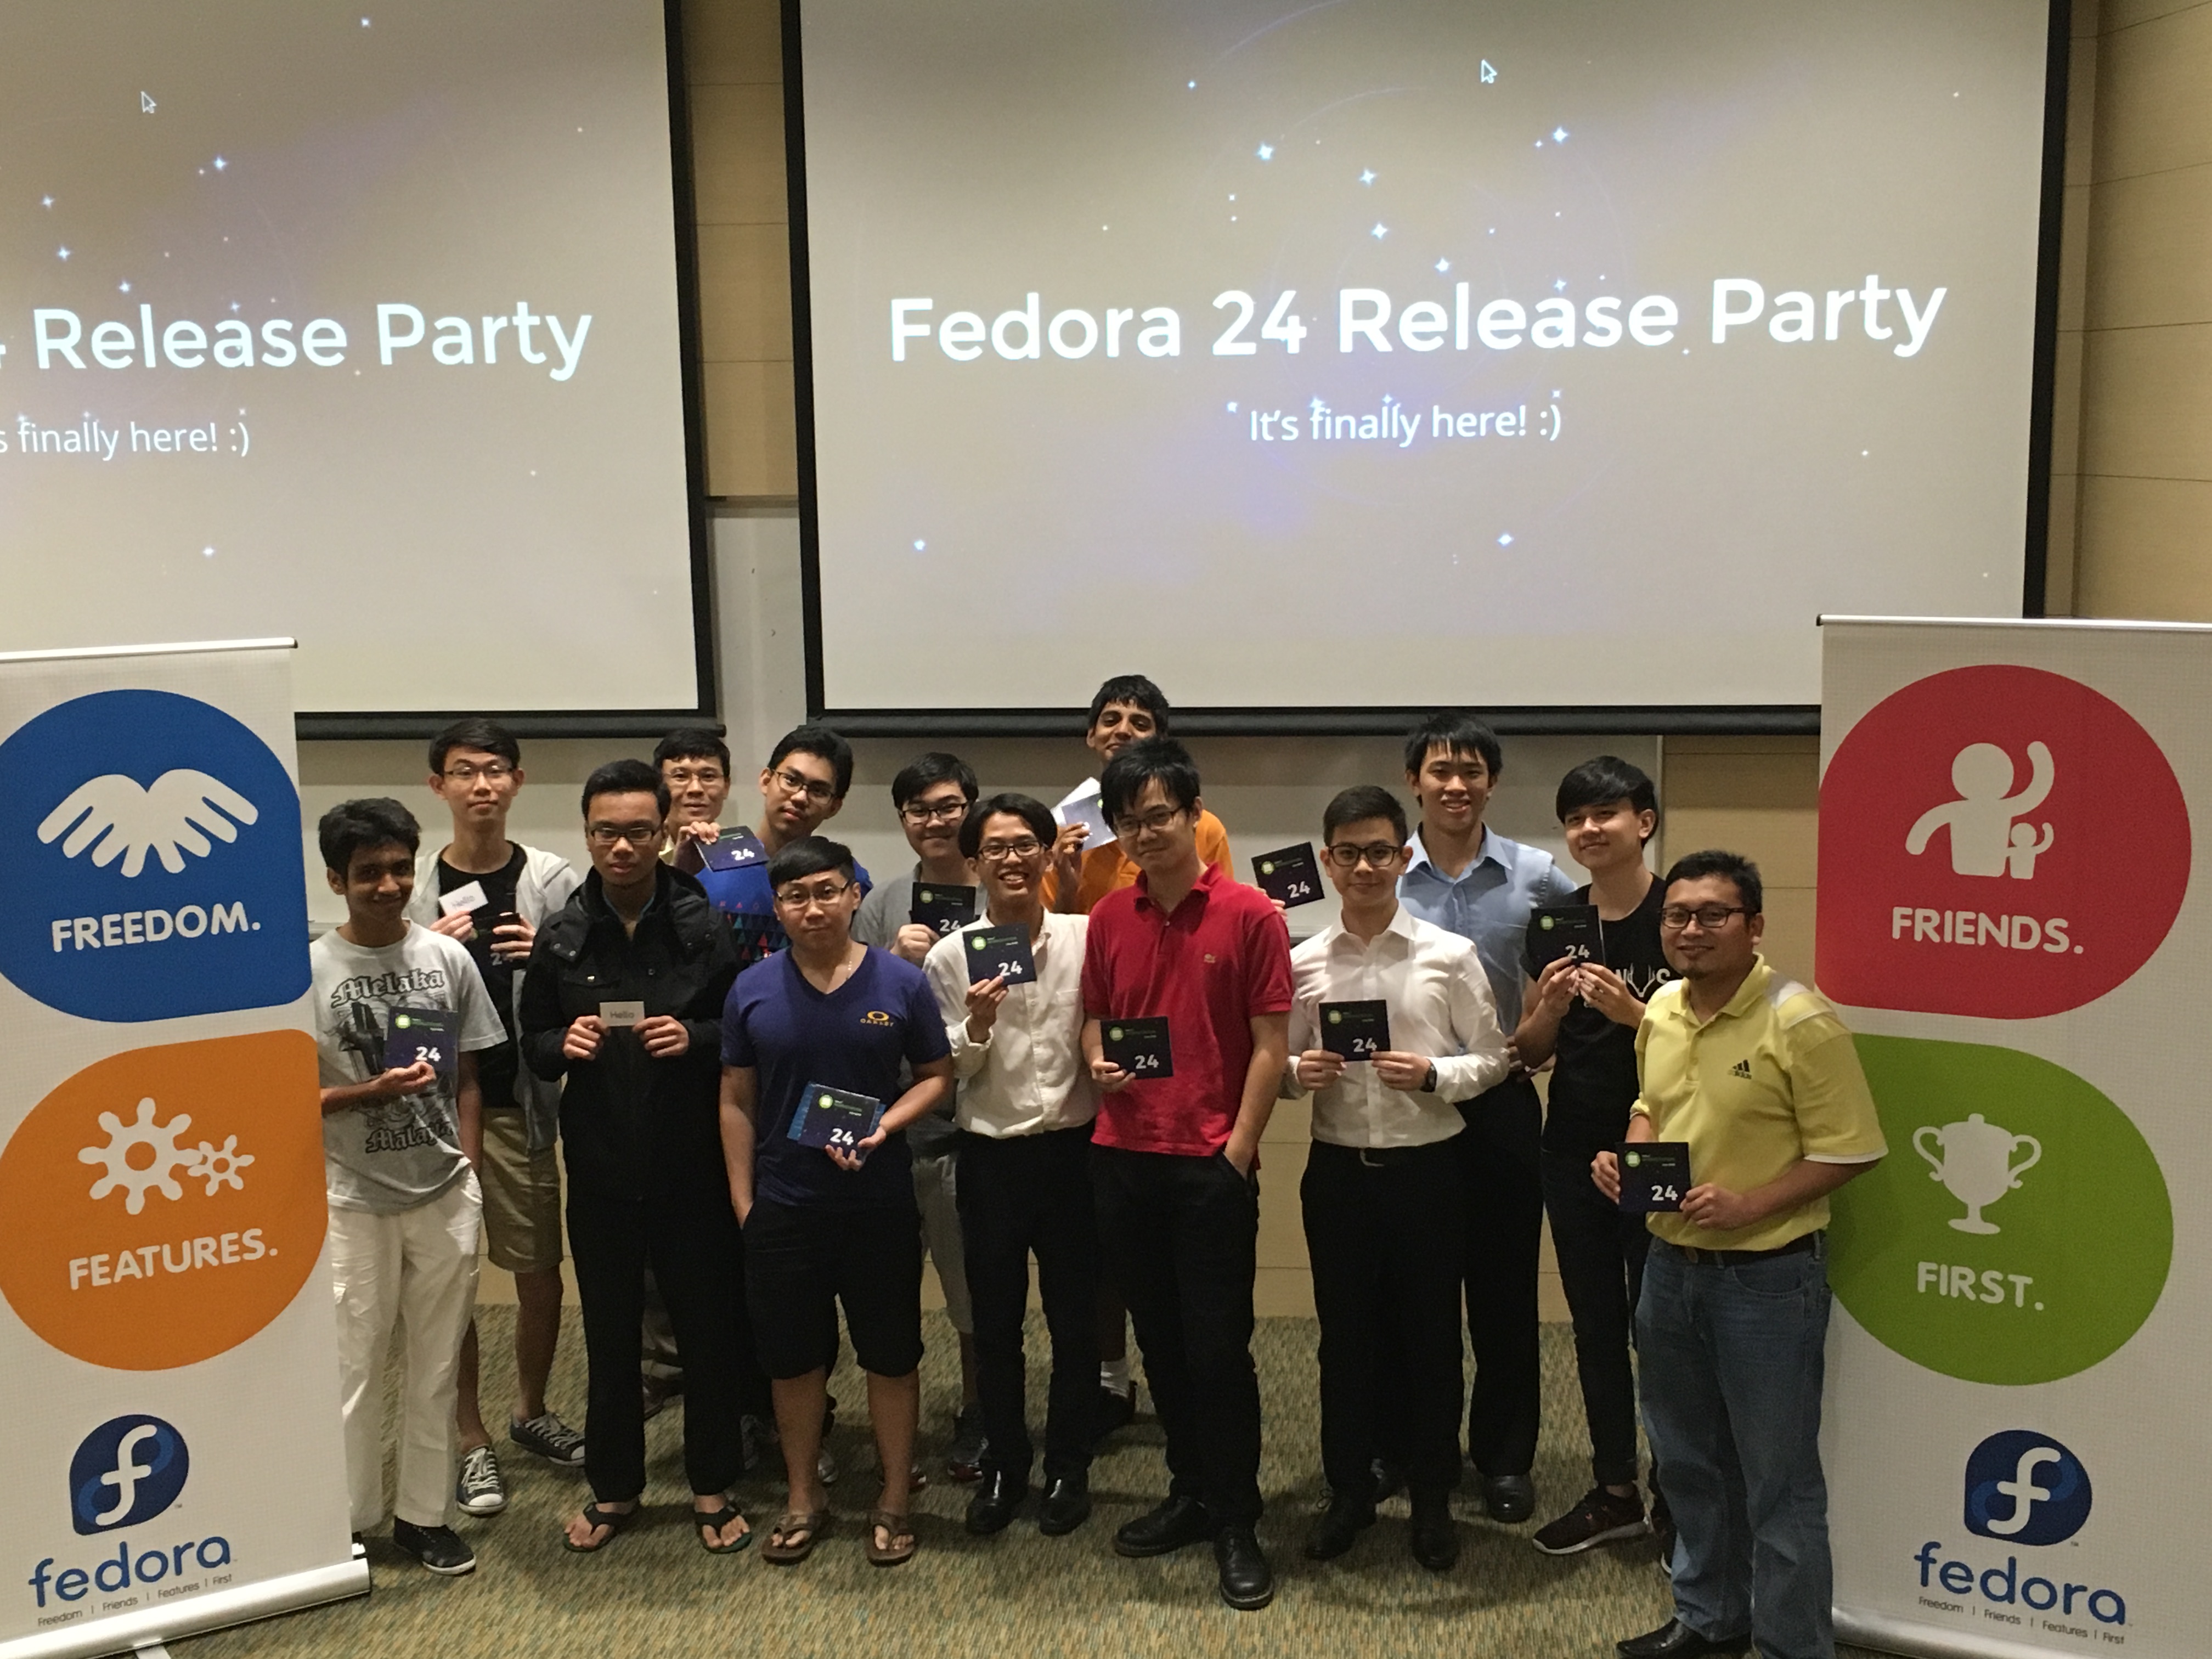 Fedora 24 Release Party in Singapore